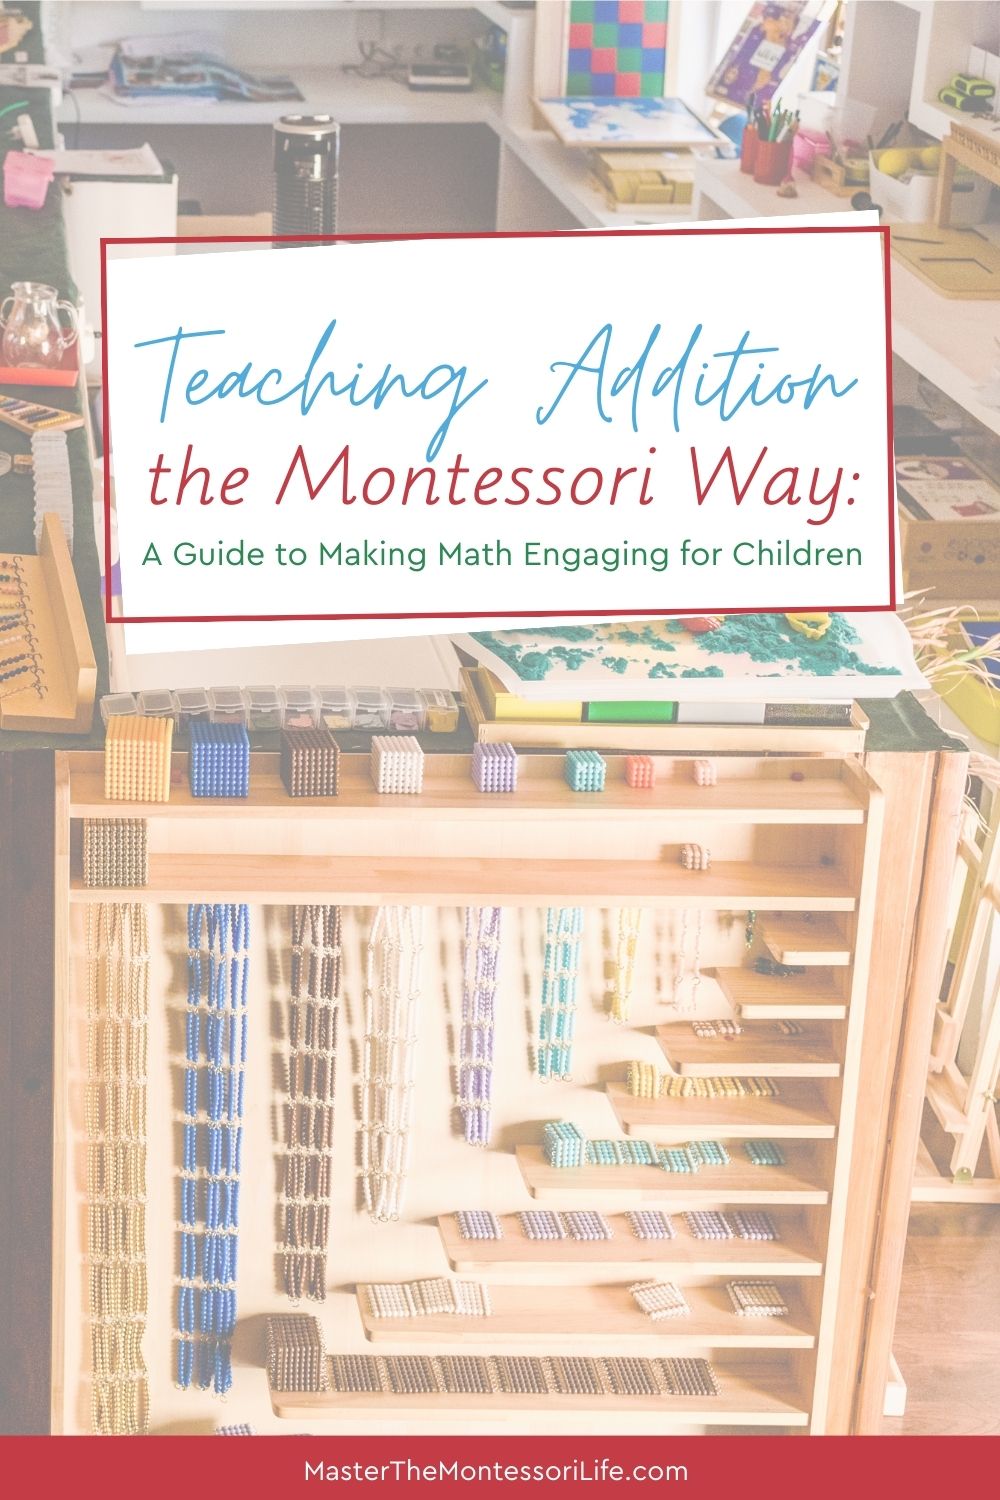 Teaching Addition the Montessori Way: A Guide to Making Math Engaging for Children